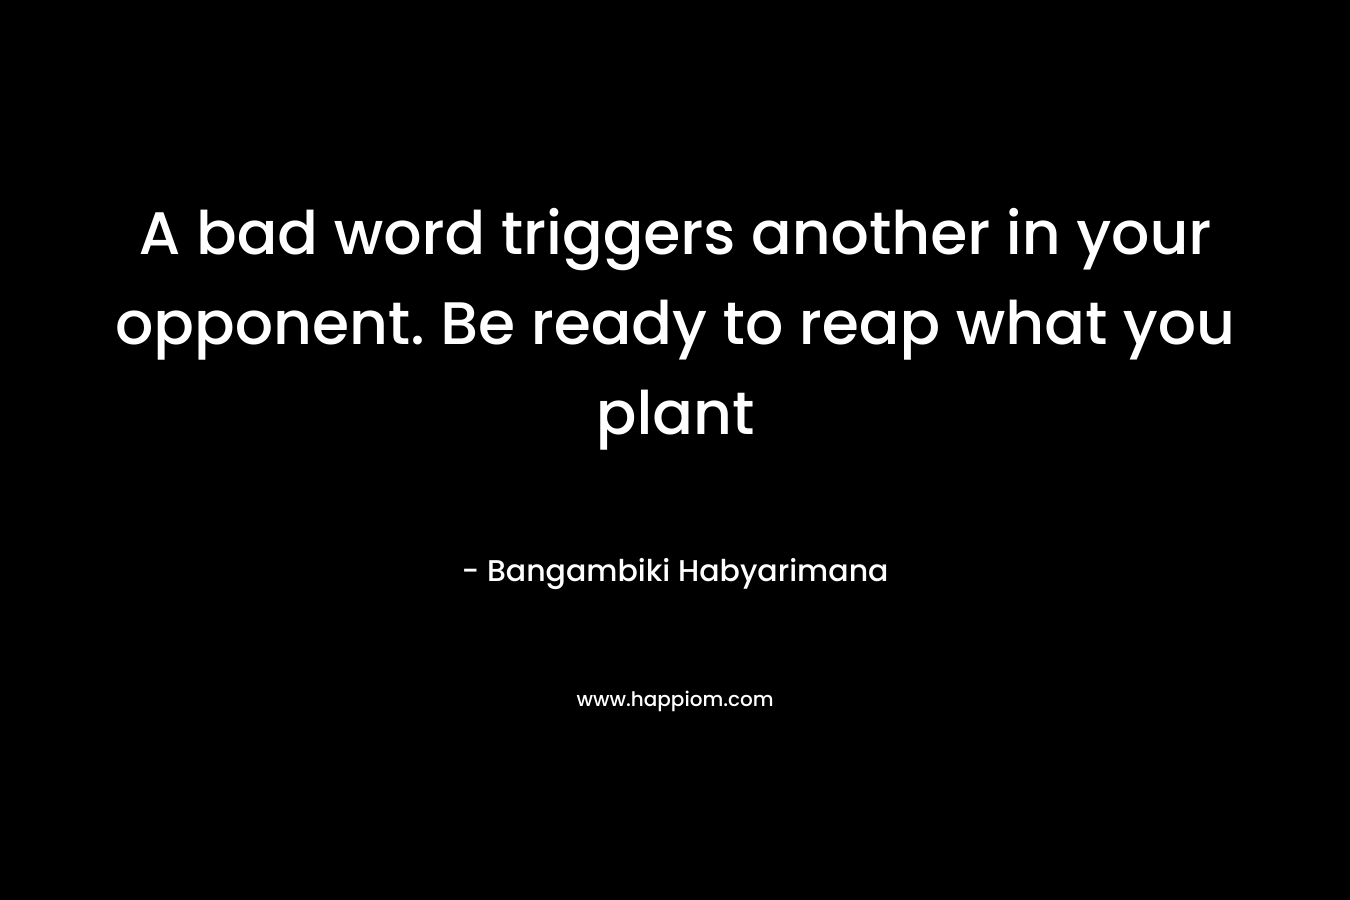 A bad word triggers another in your opponent. Be ready to reap what you plant